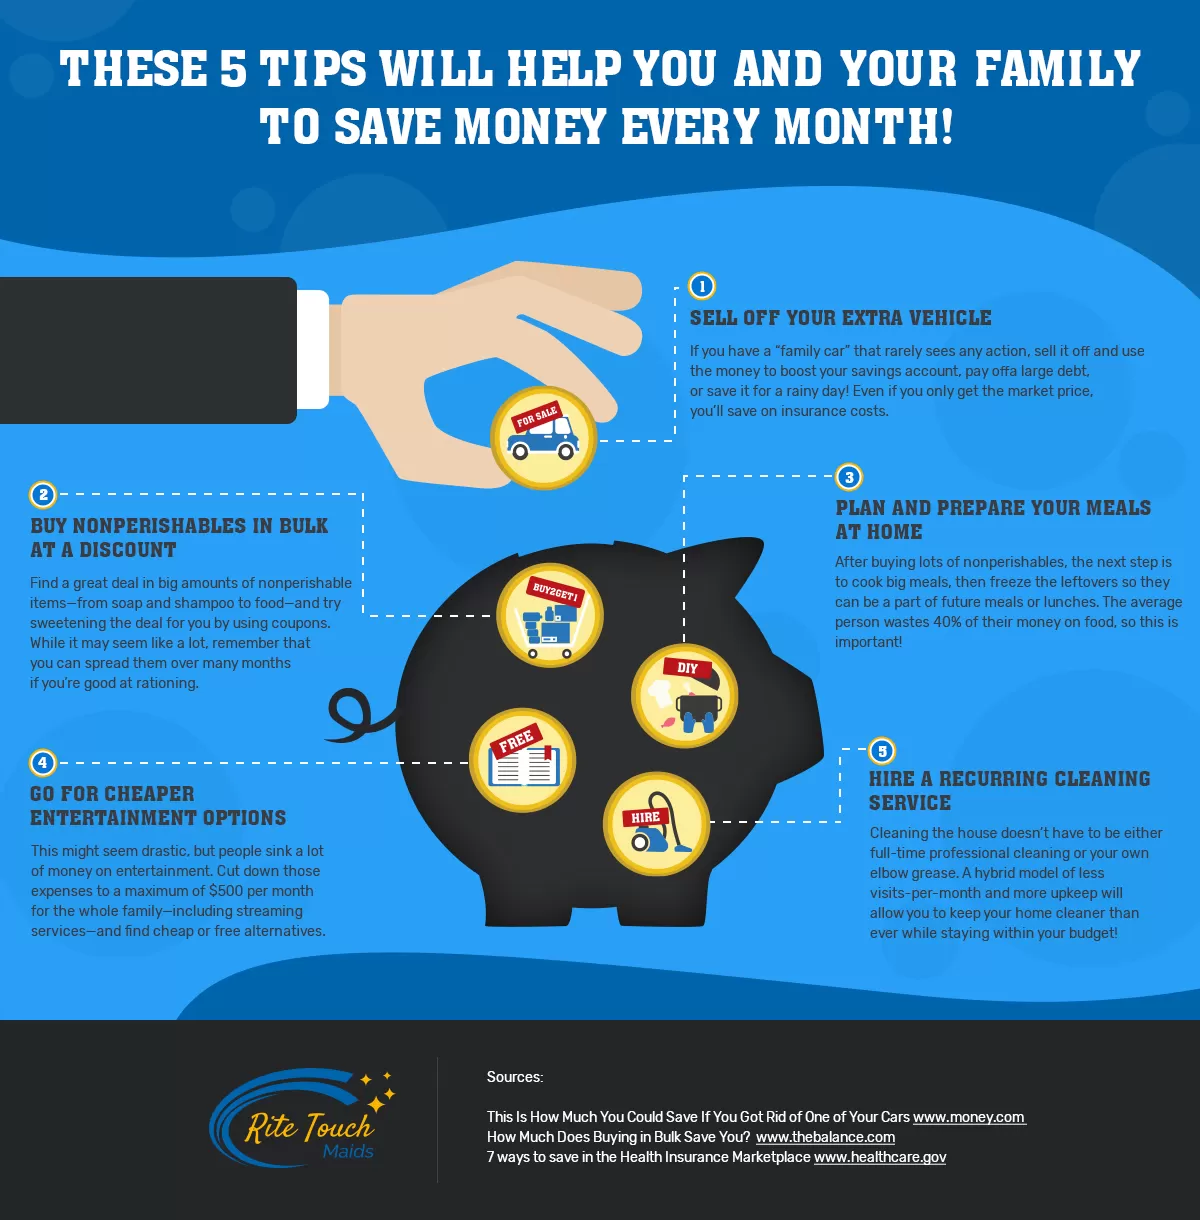 These 8 Tips Will Help You and Your Family to Save Money Every Month!